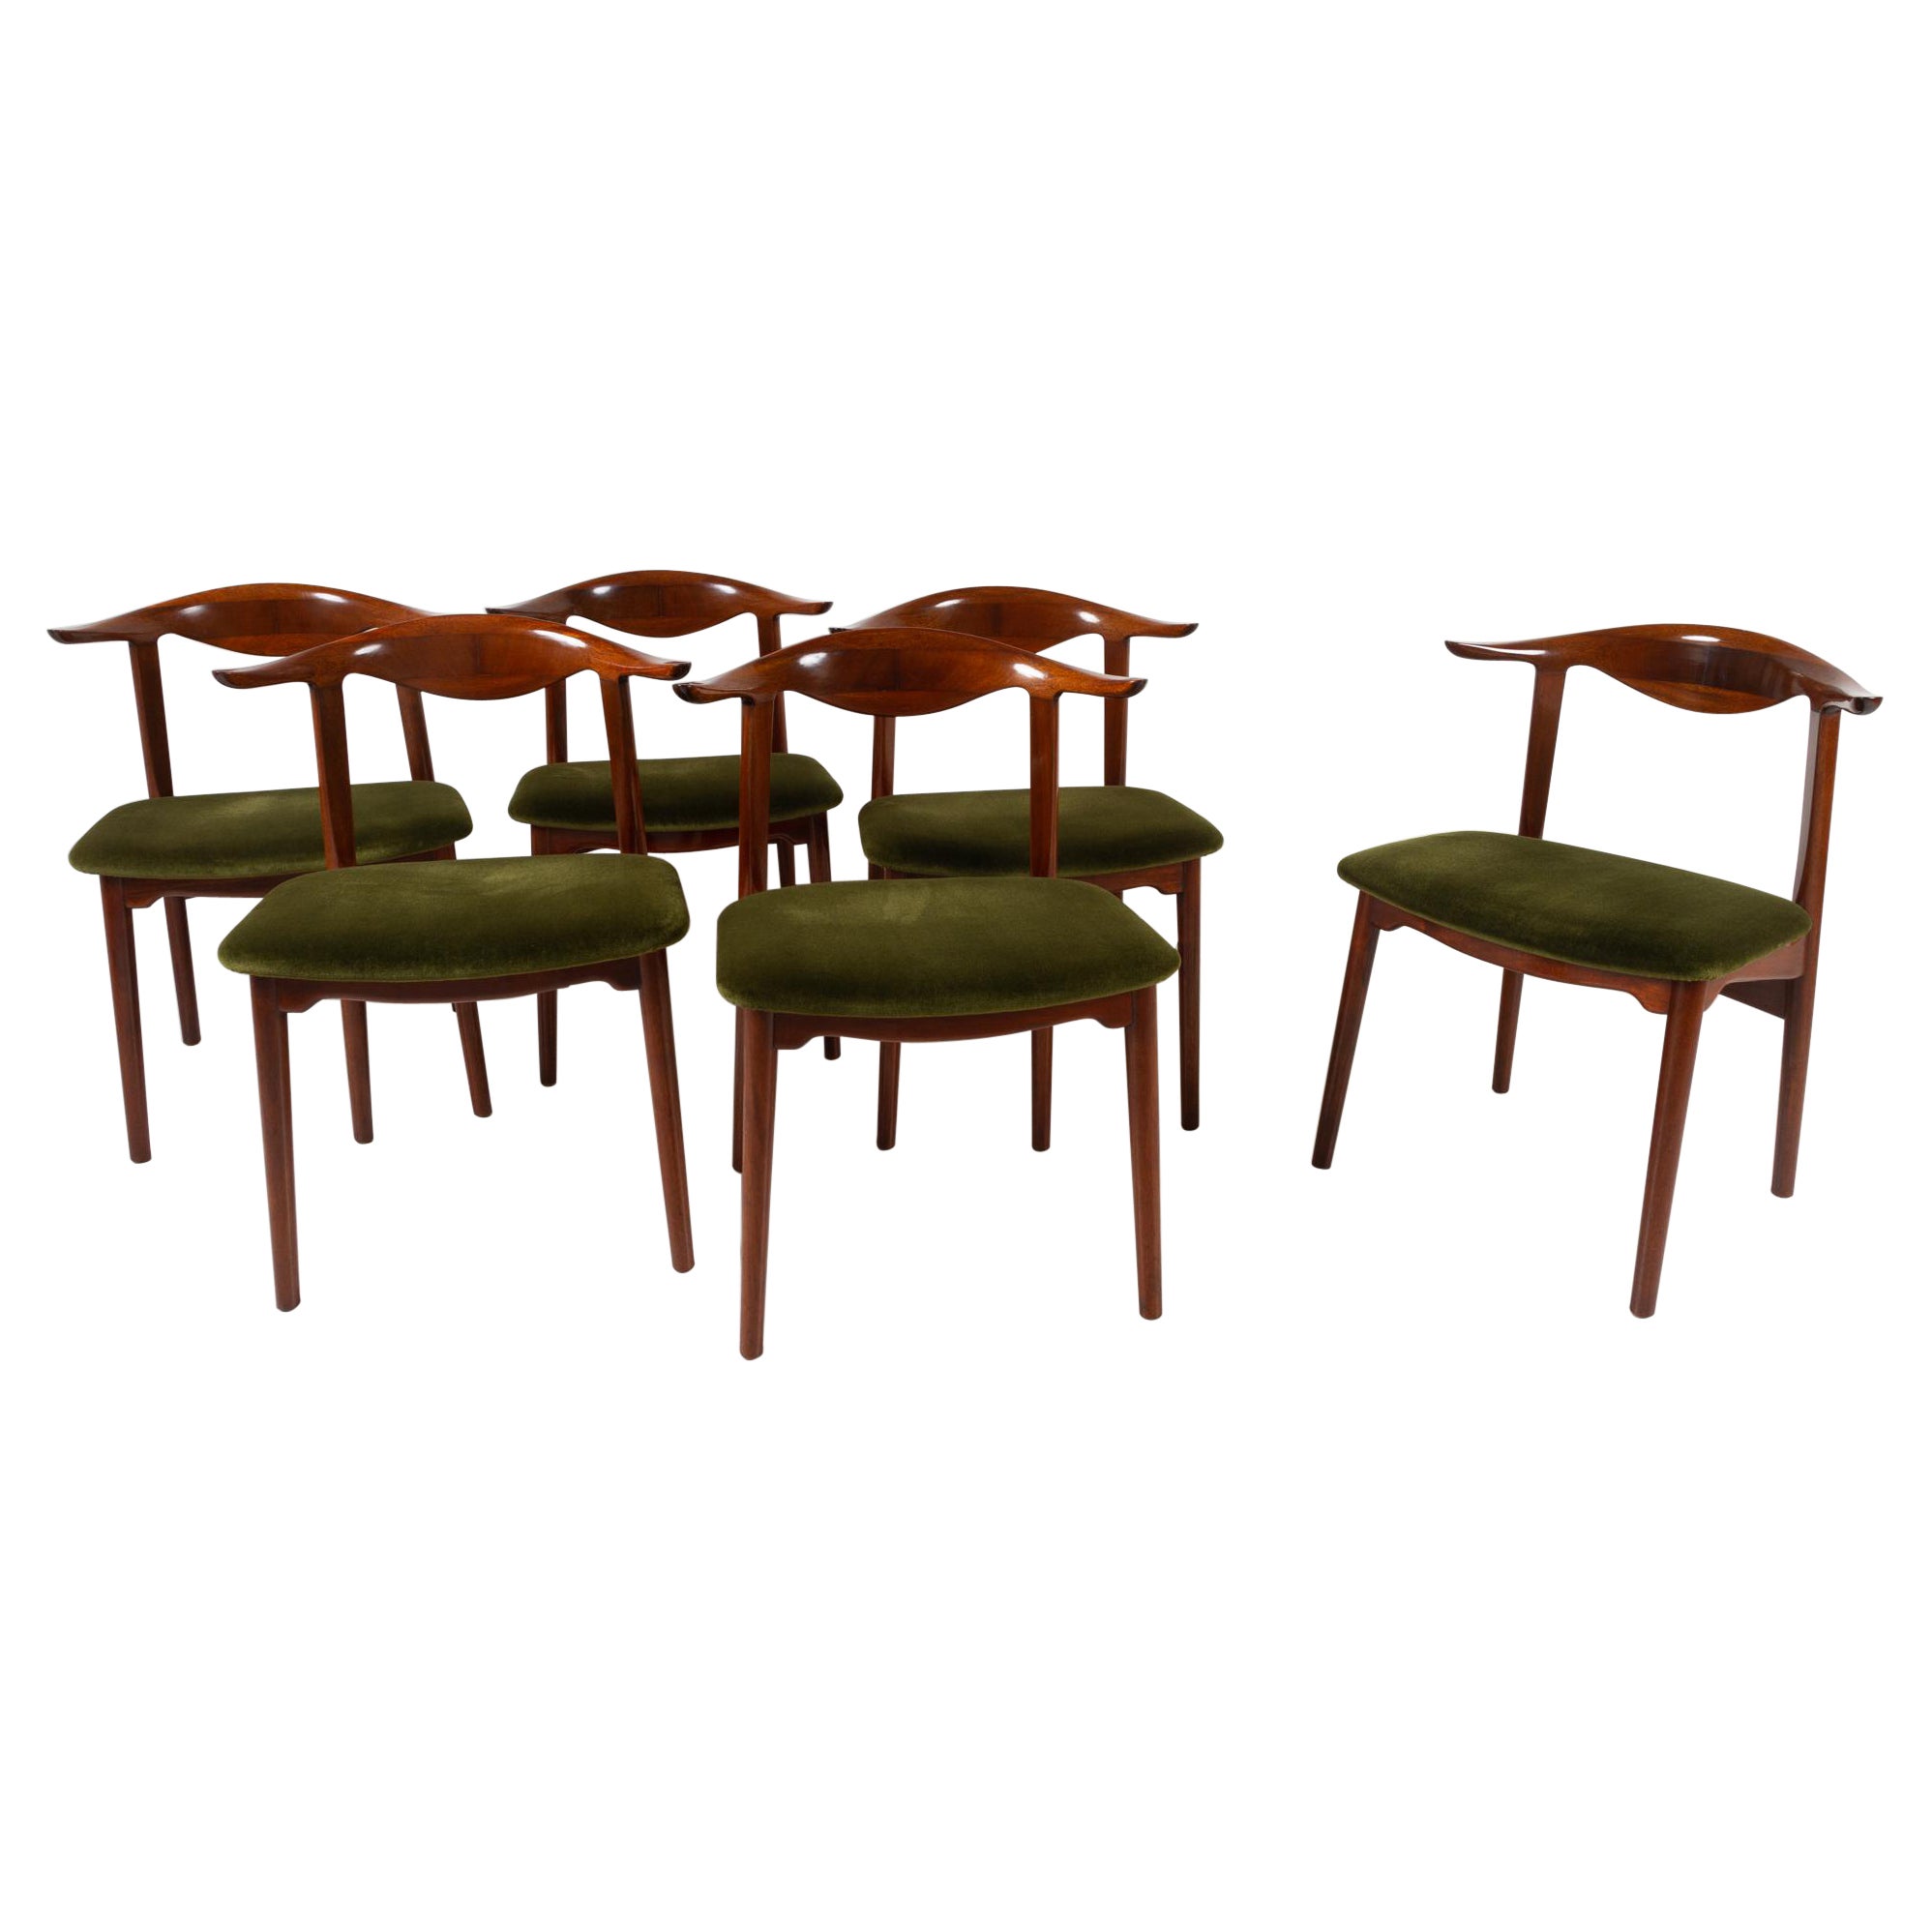 Vintage Danish Mahogany Cowhorn Chairs 1940s, Set of 6 For Sale